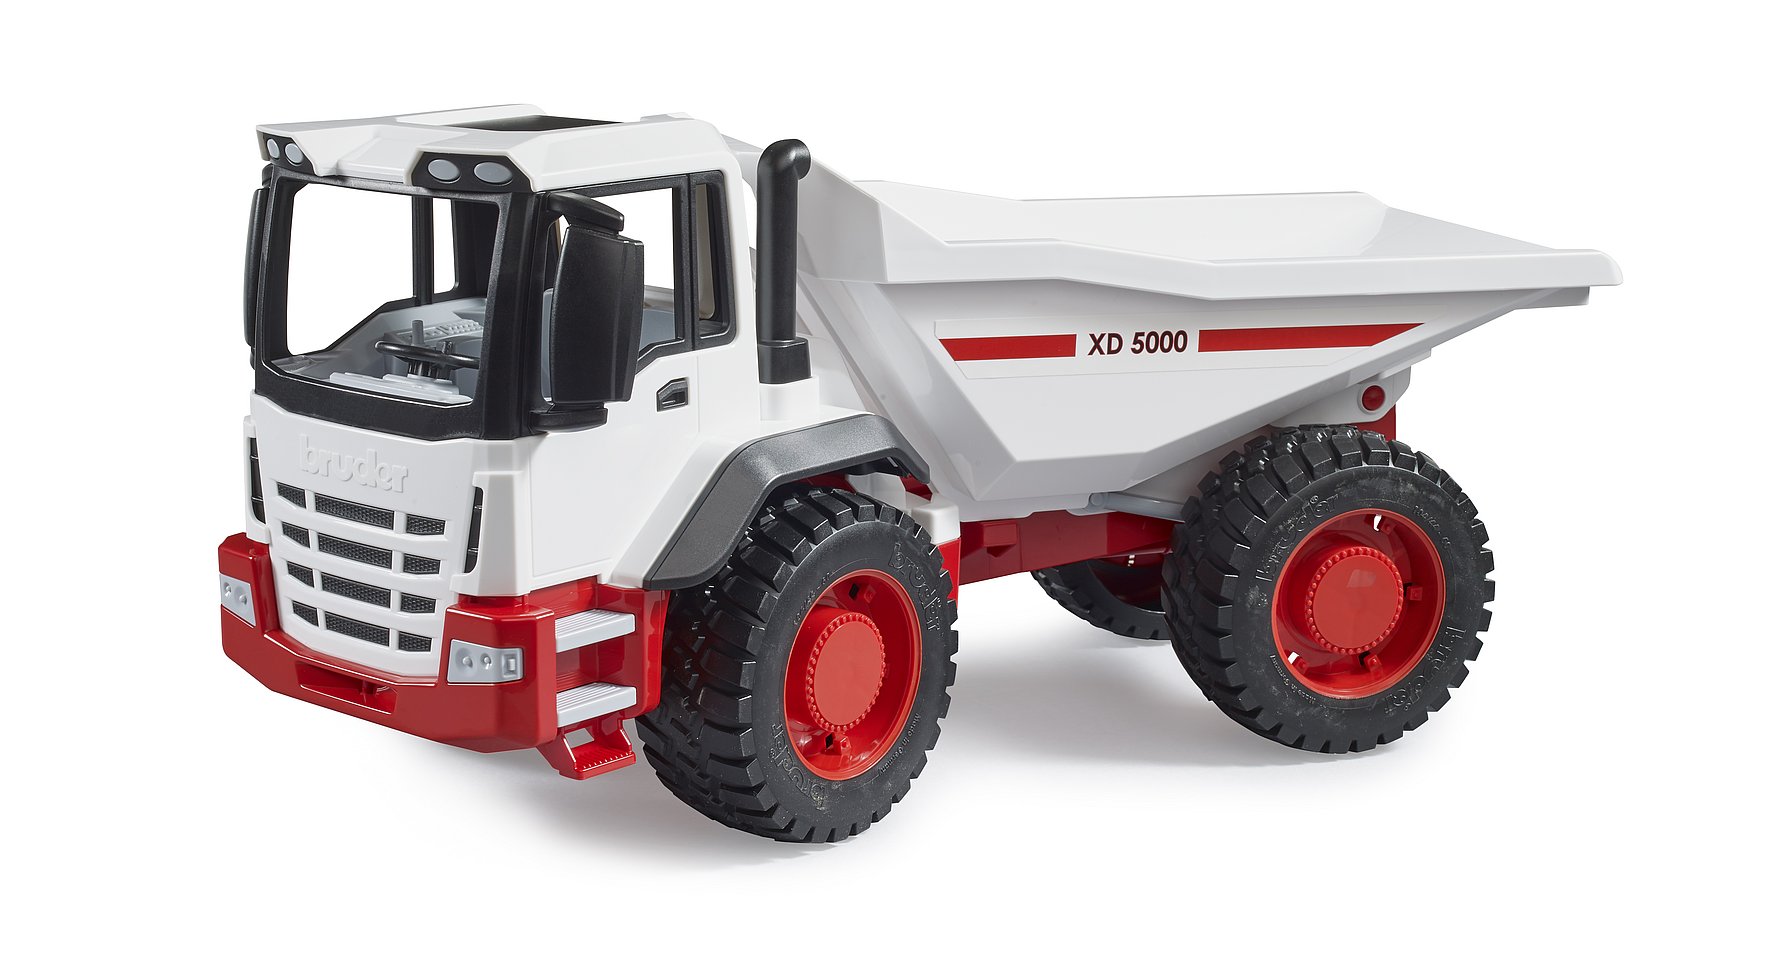 Product Image - Bruder 03415 - Bruder Articulated Dump Truck ED 5000 New Item 2022 - 1:16 Scale